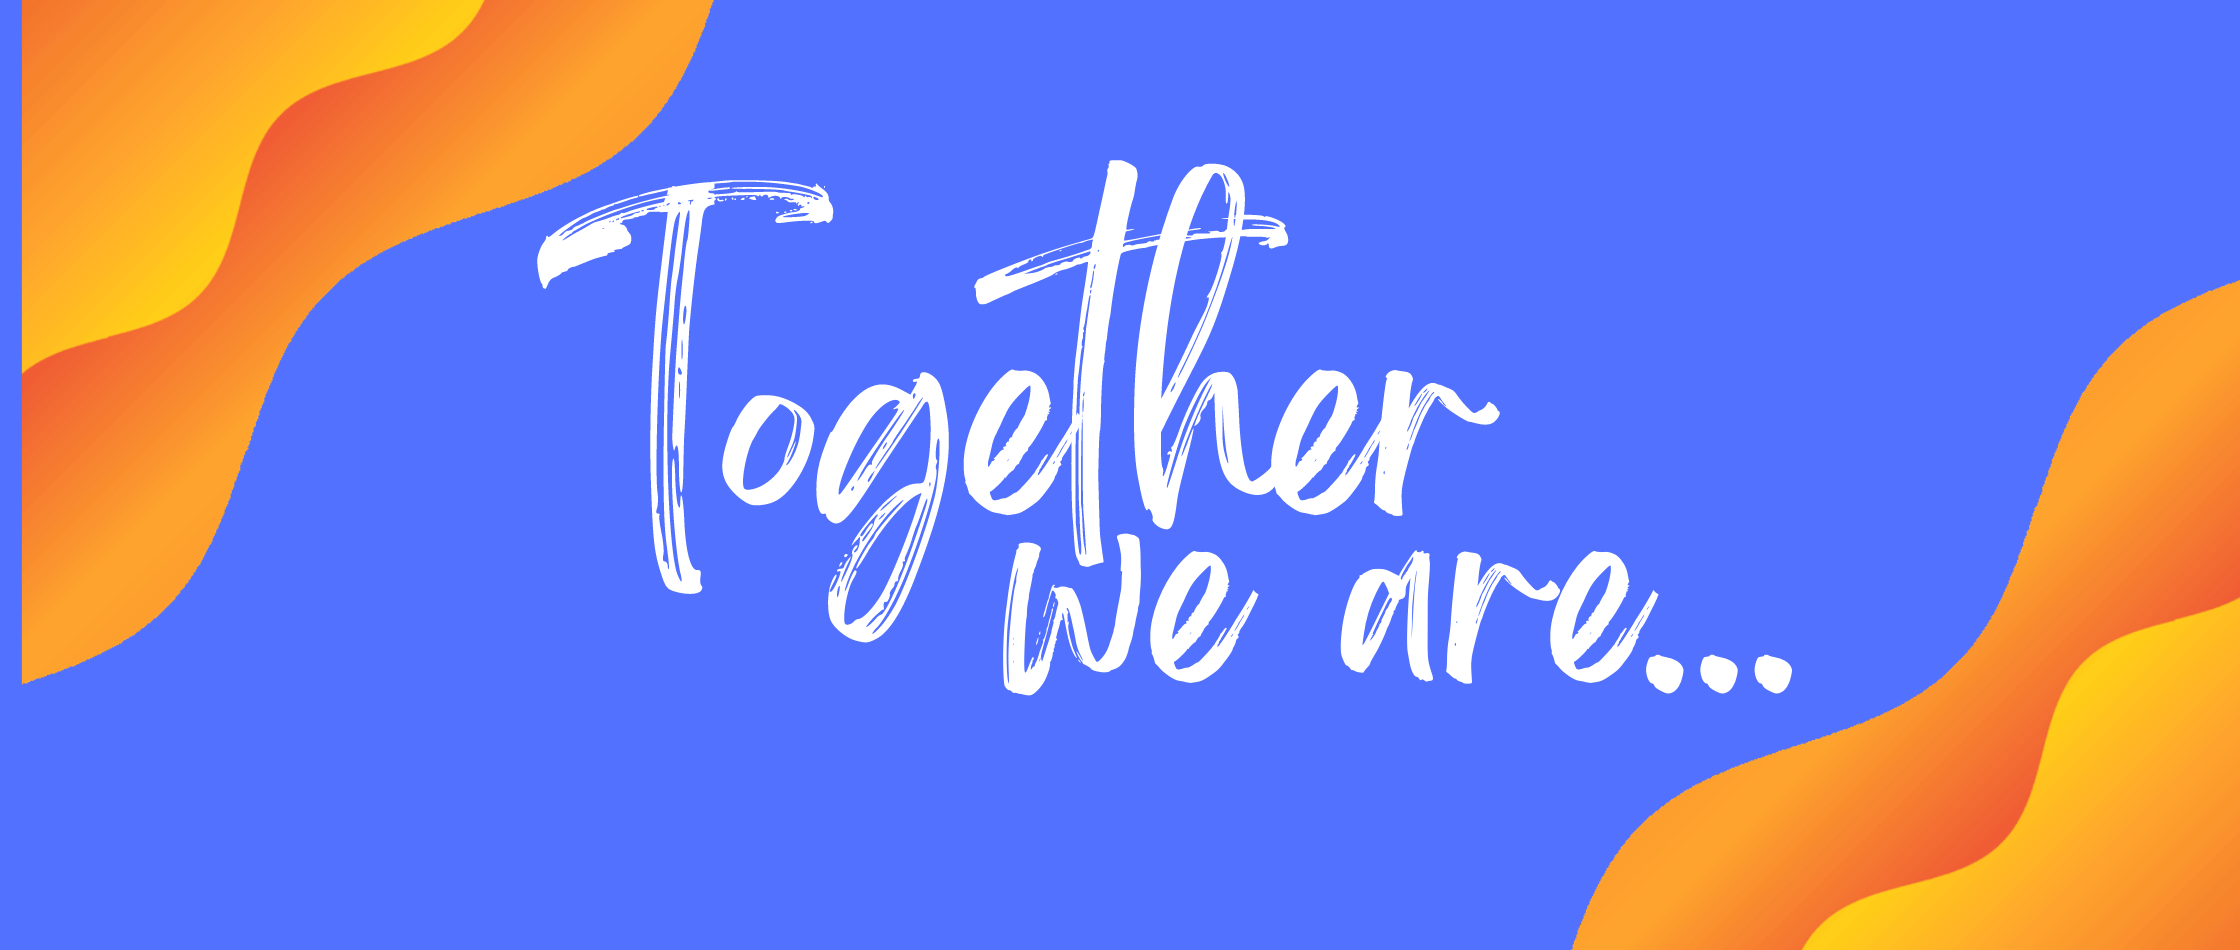 blue background with orange waves in the corner with white brushy text that reads "Together We Are"